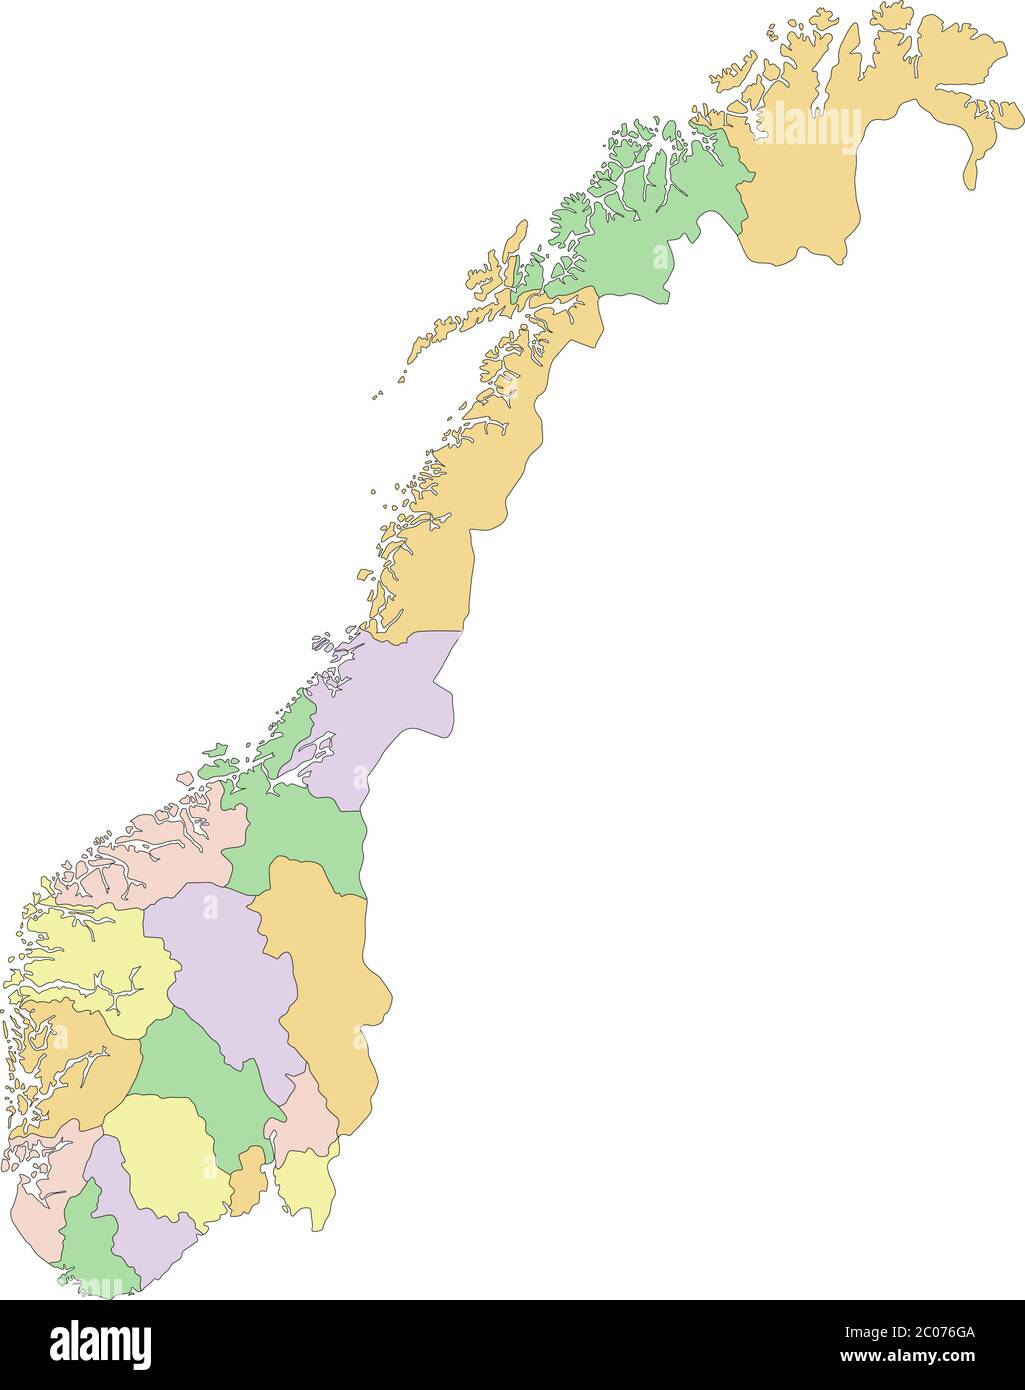 Norway - Highly detailed editable political map. Stock Vector